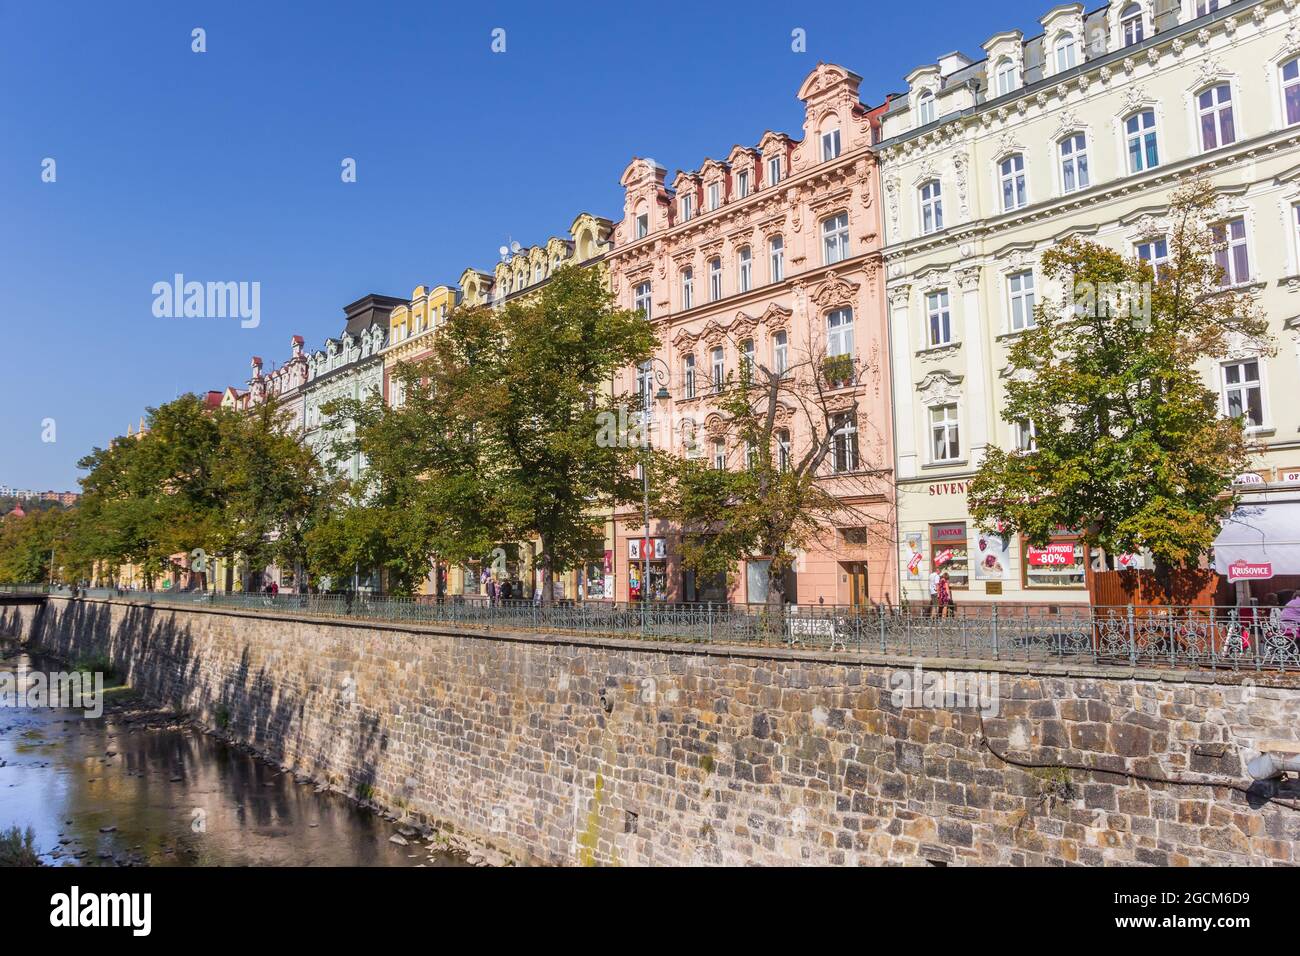 Colorful historic houses at the quayside in Karlovy Vary, Czech Republic Stock Photo